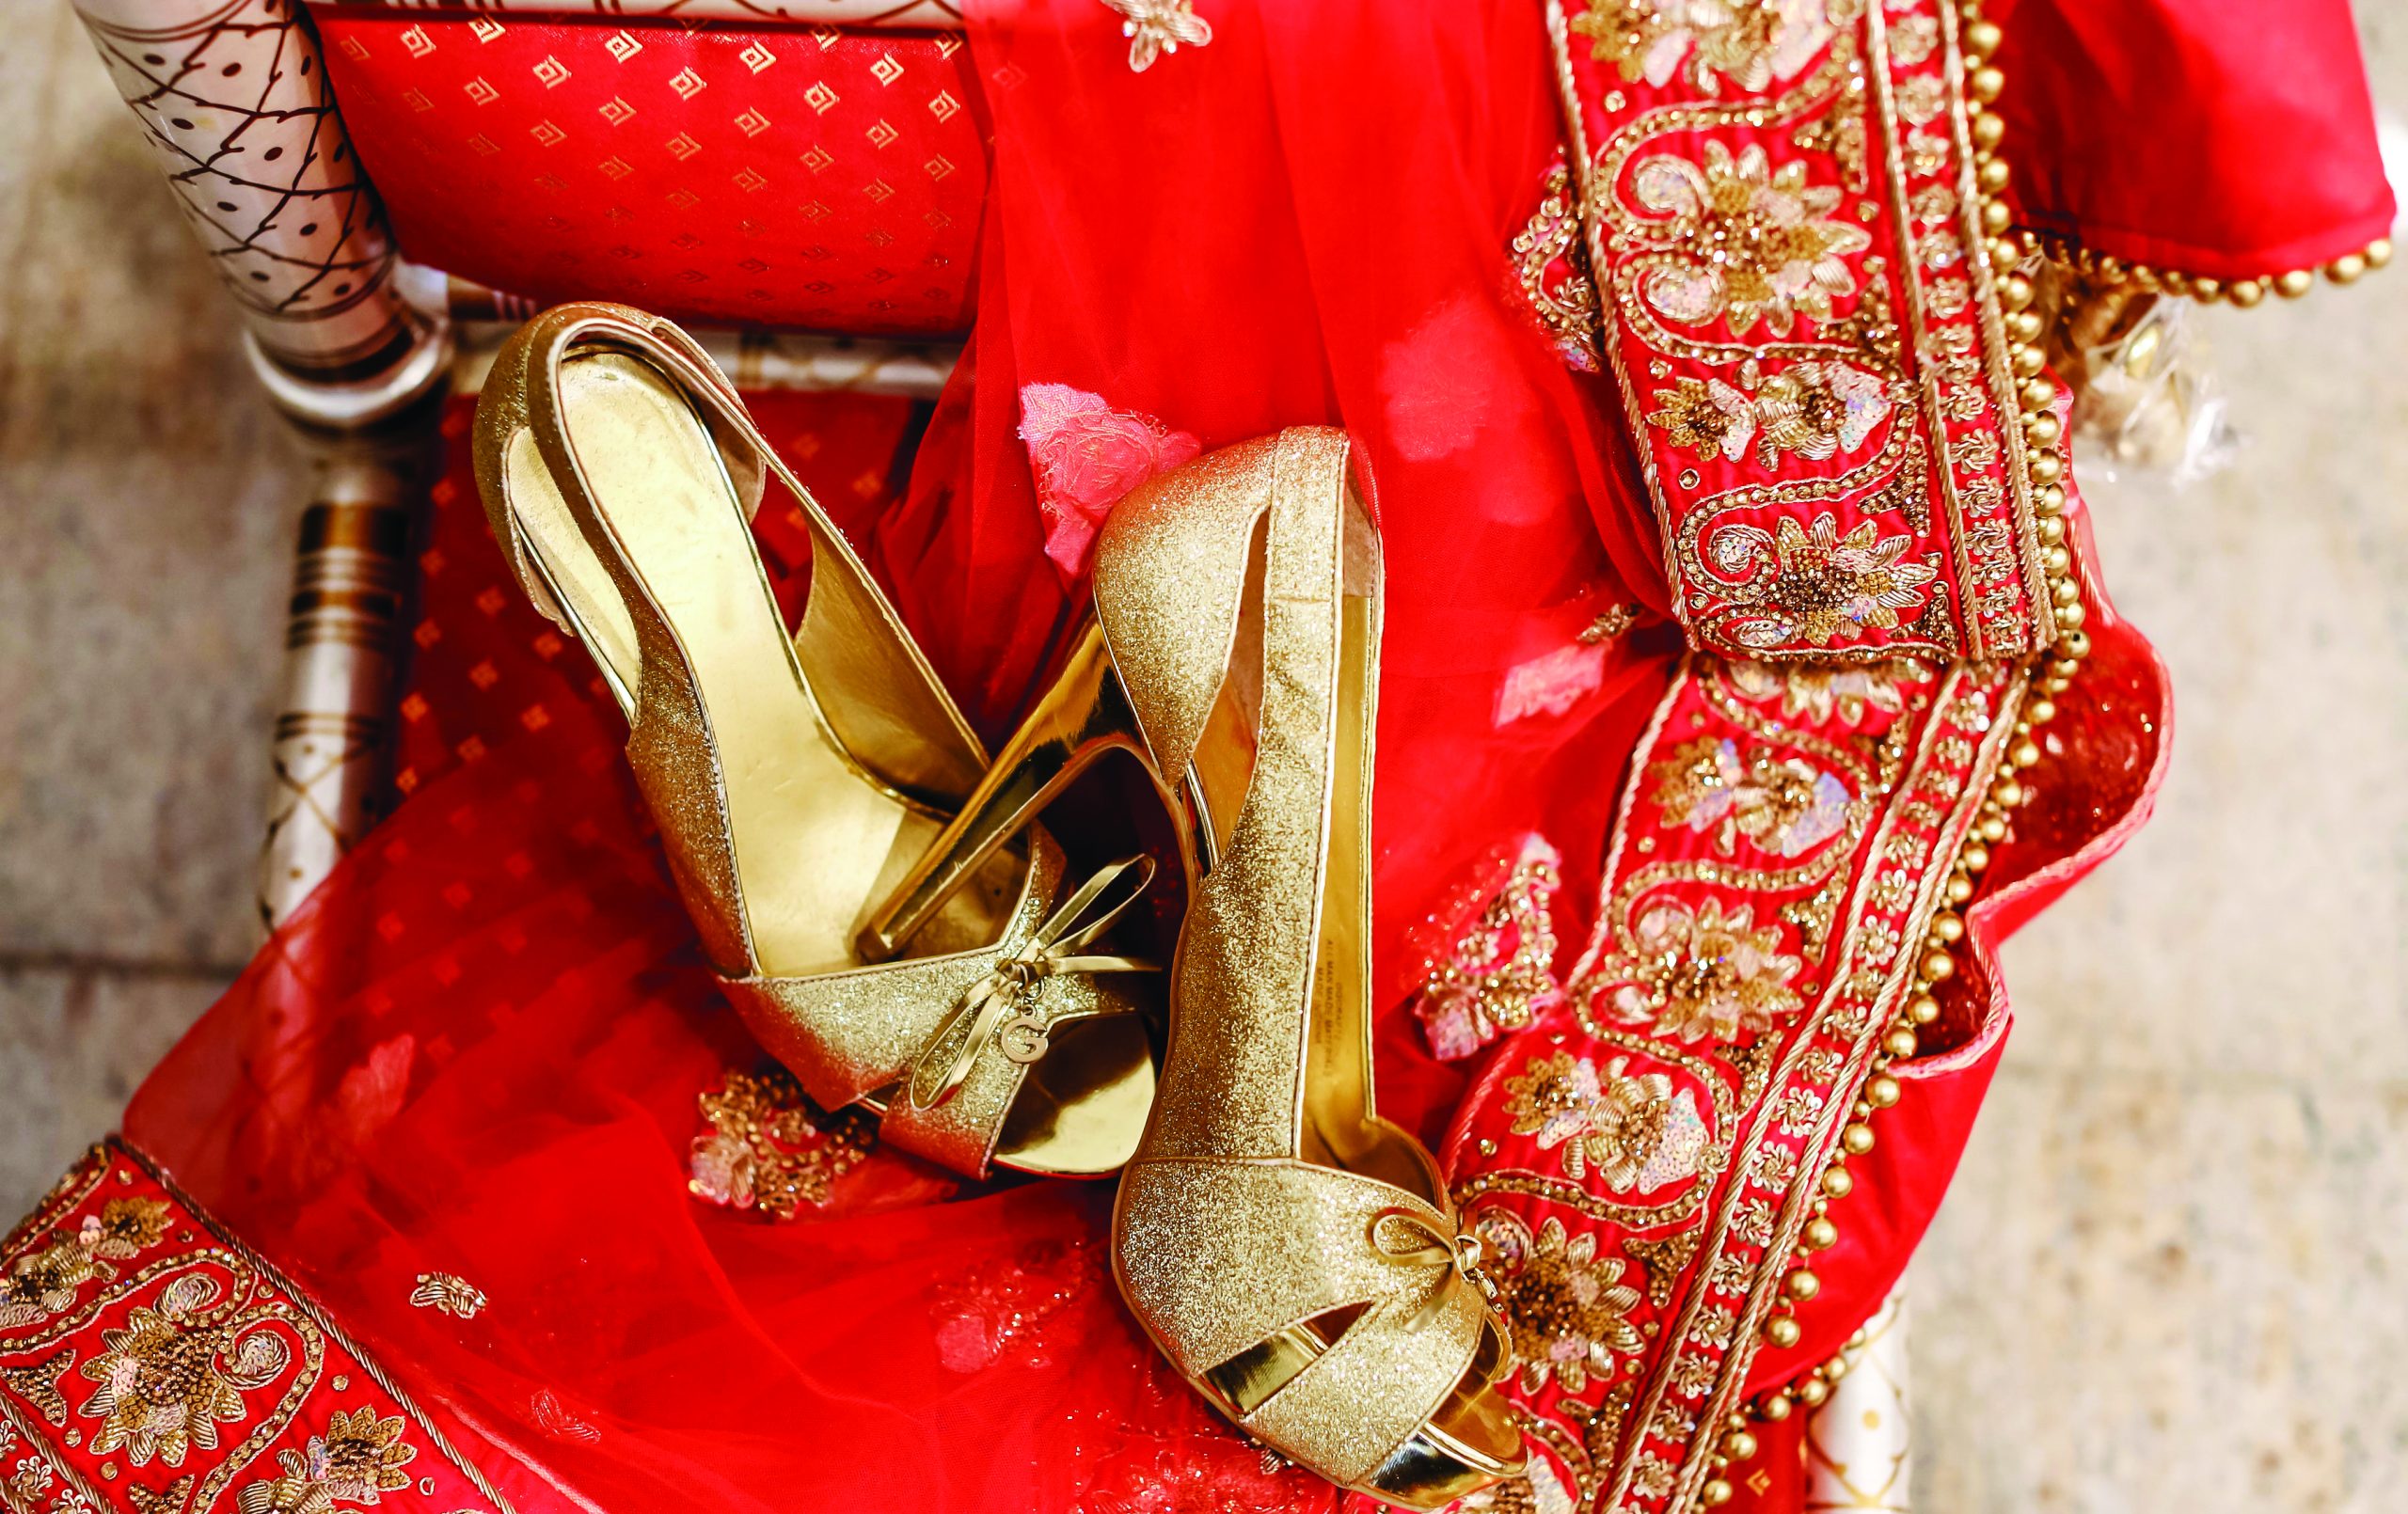 Indian Grooms Wedding Shoes Close Stock Photo 2366716445 | Shutterstock